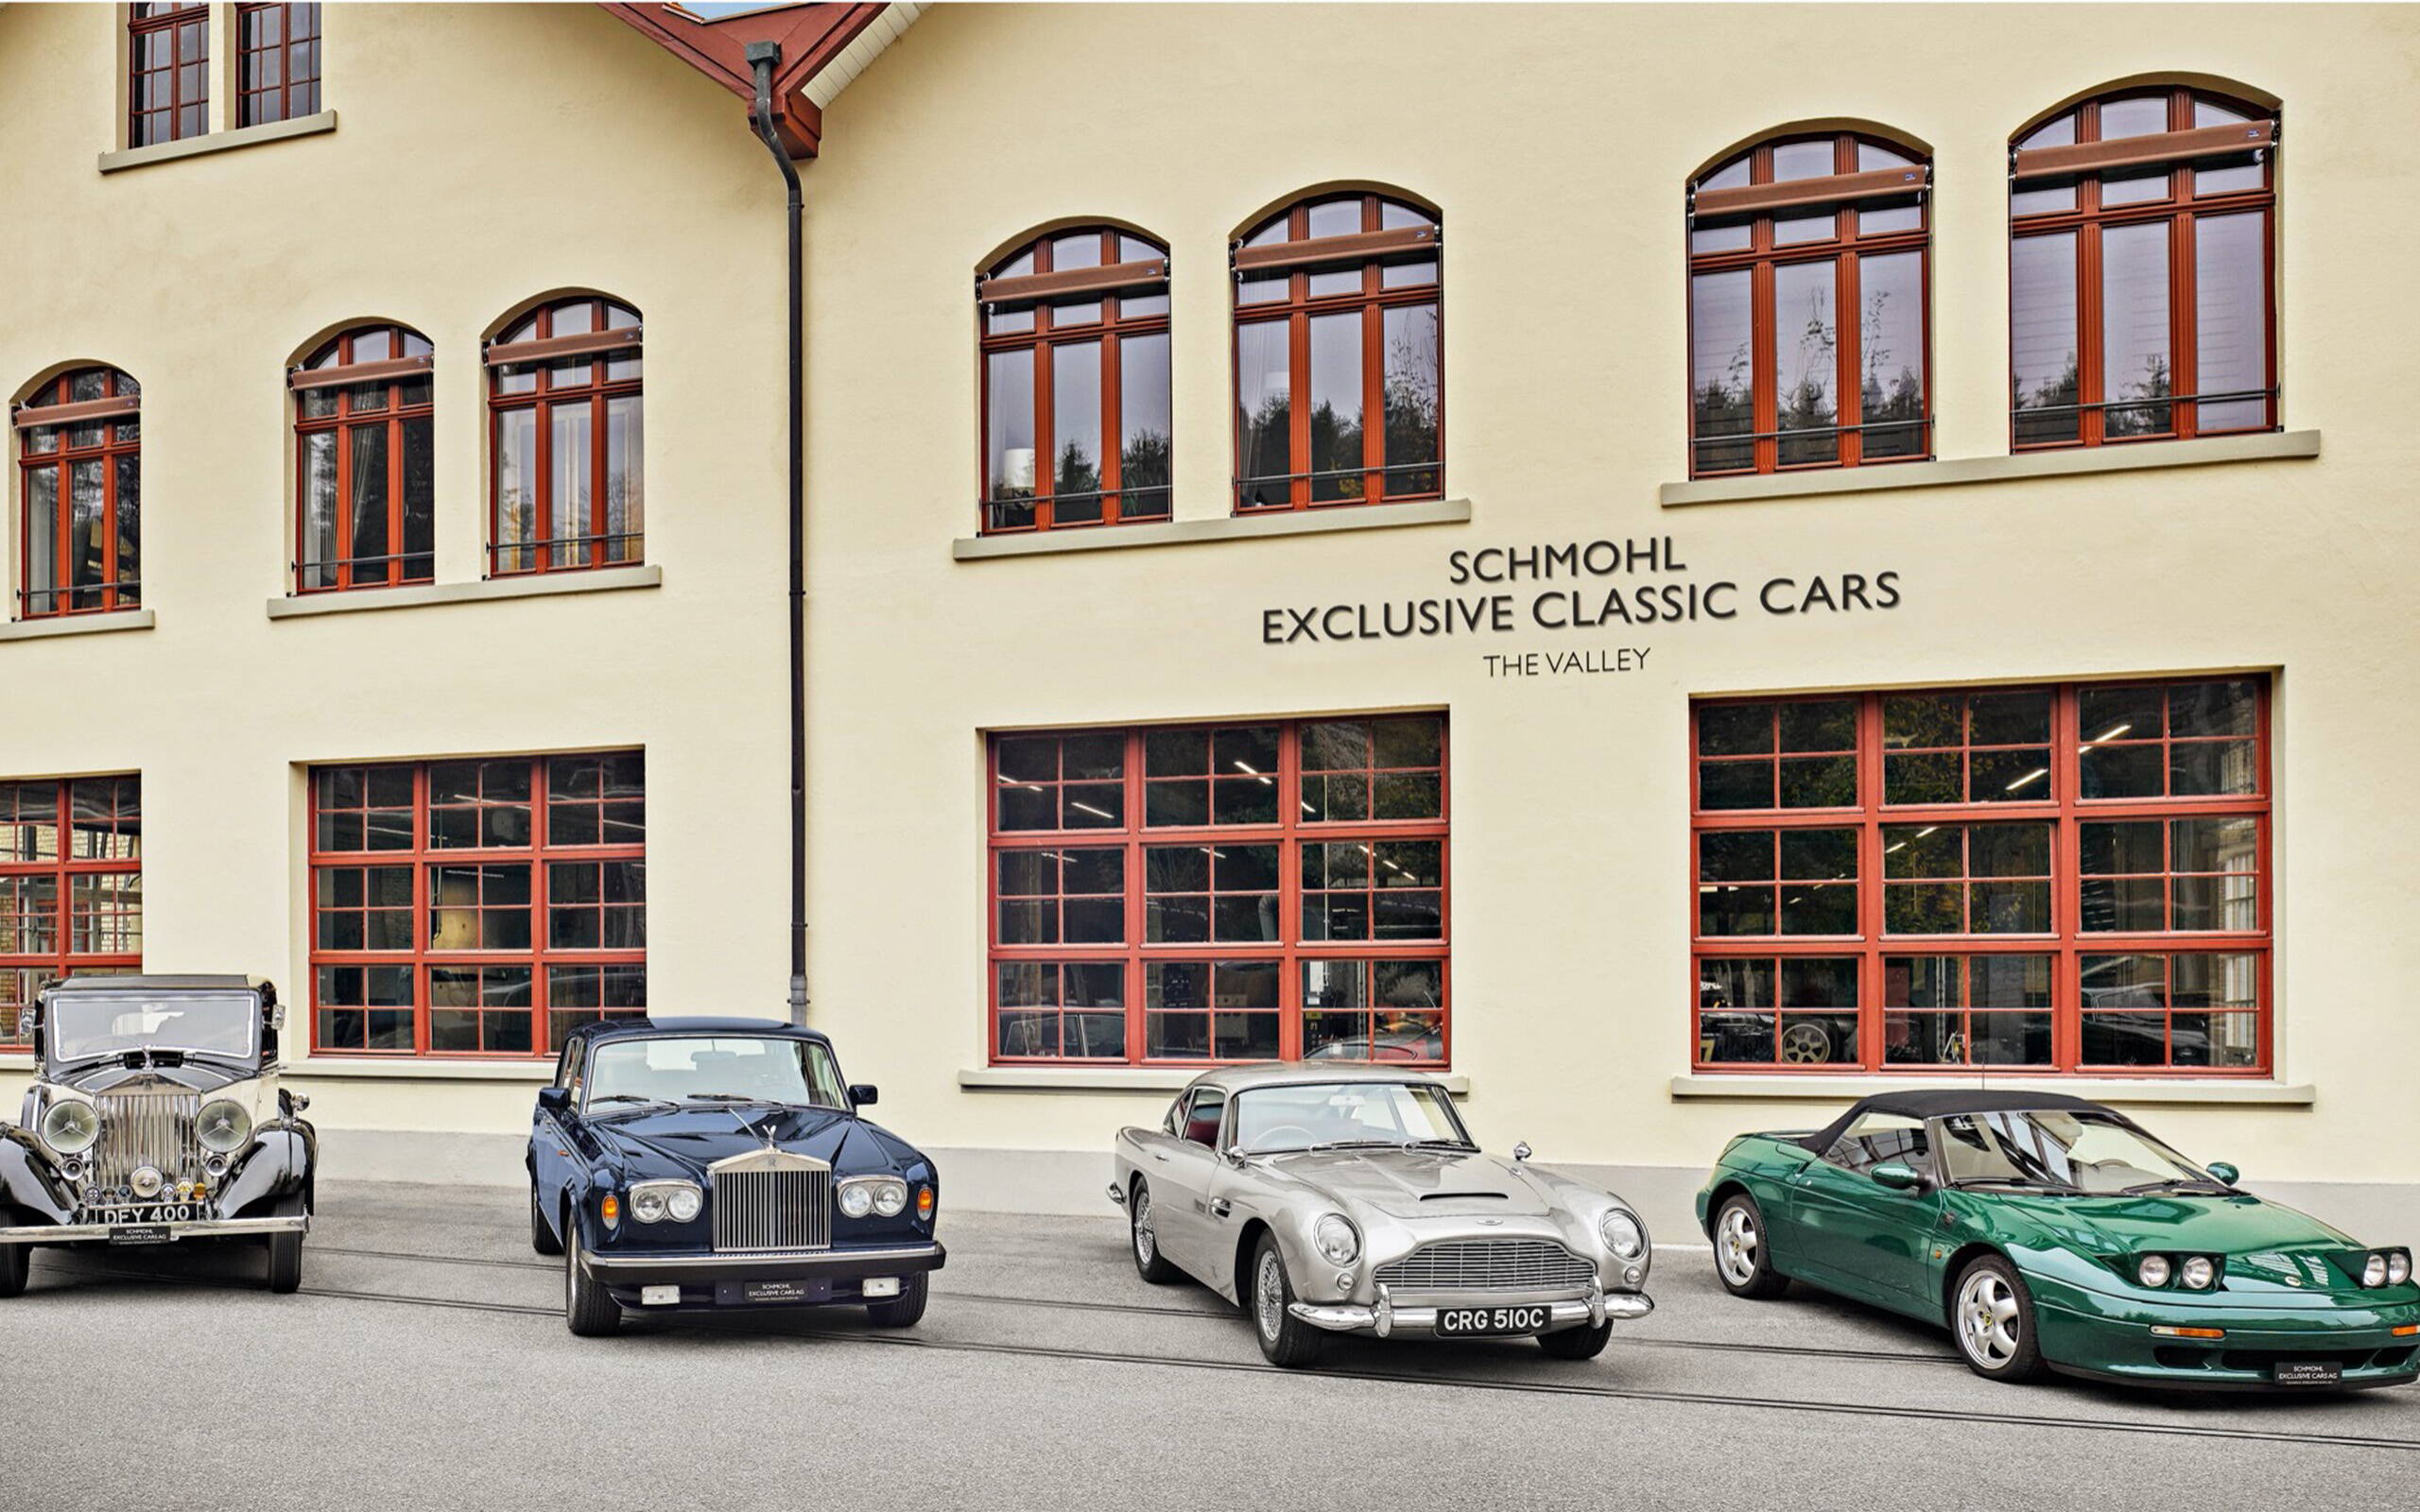 Schmohl Exclusive Classic Cars